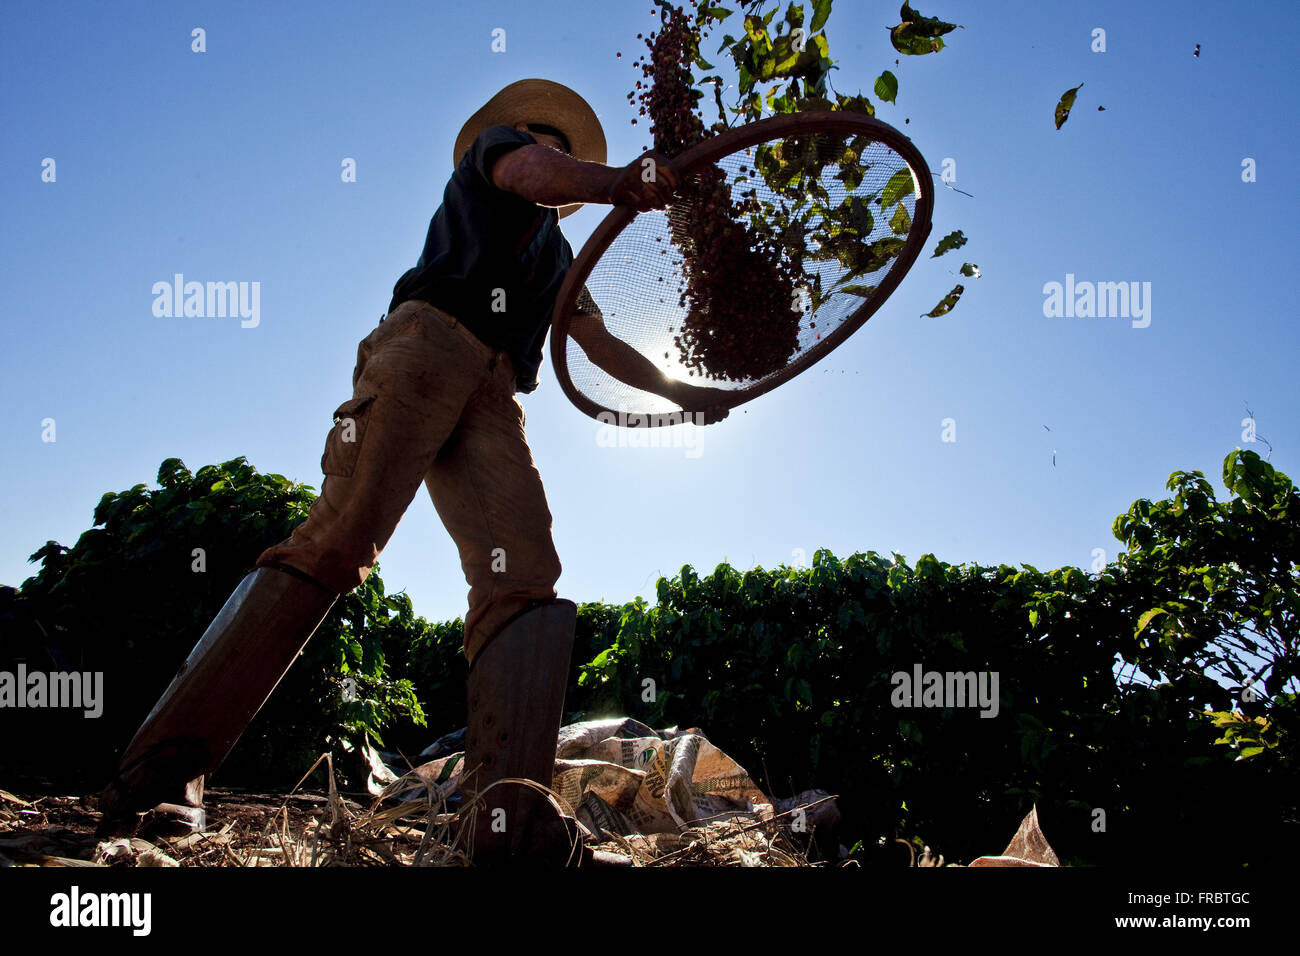 Rural workers in the coffee plantation - phase abanacao Stock Photo